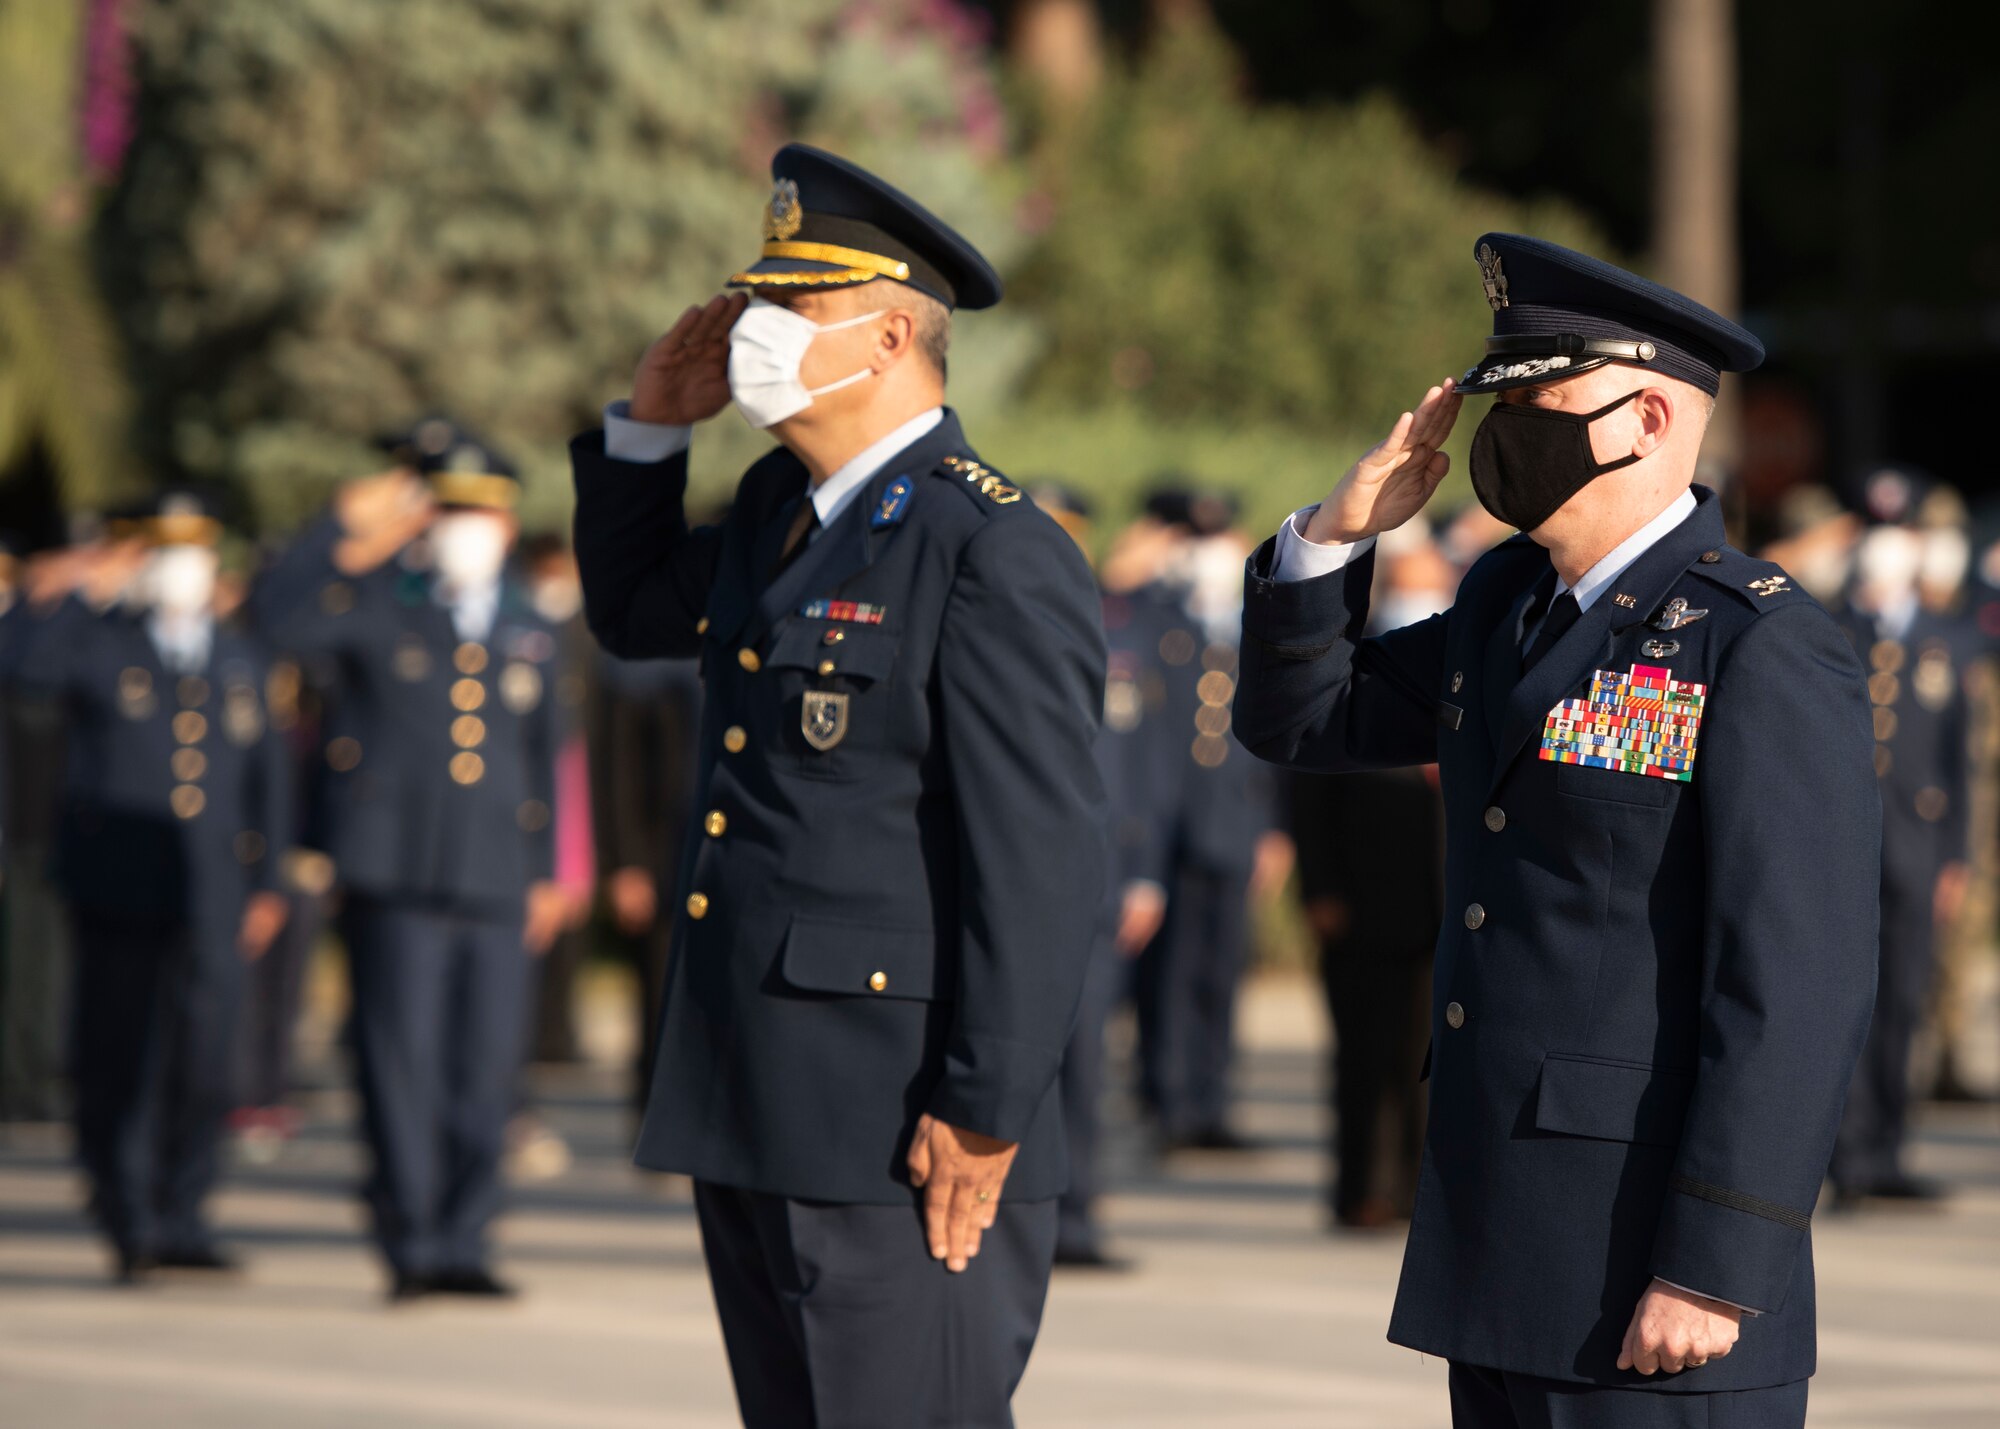 10th Tanker Base commander and 39th Air Base Wing commander render a salute during a ceremony.